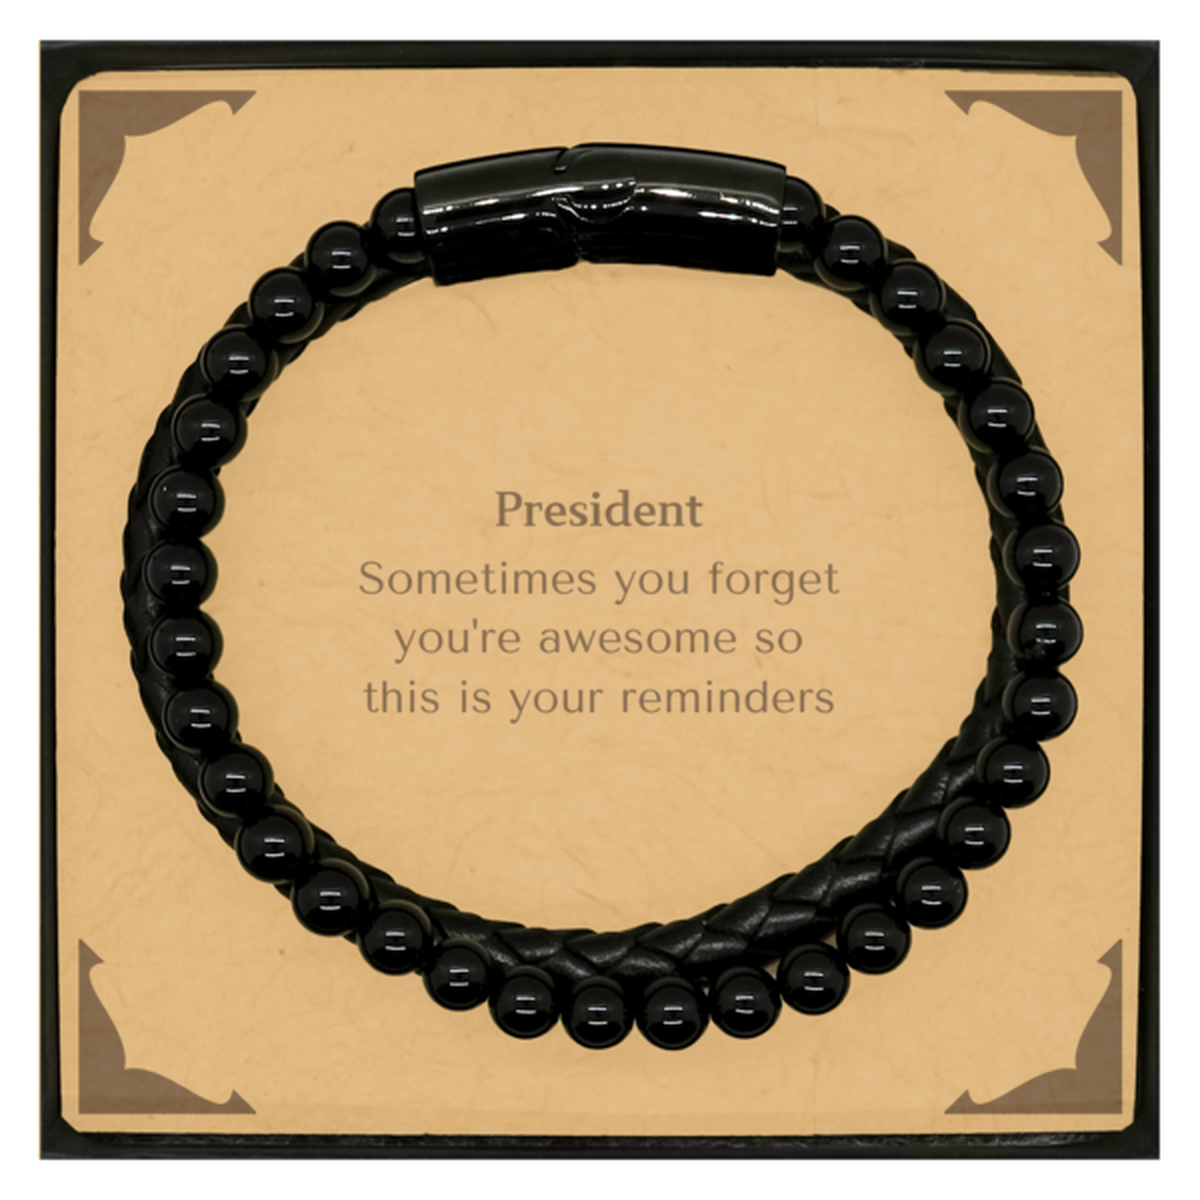 Sentimental President Stone Leather Bracelets, President Sometimes you forget you're awesome so this is your reminders, Graduation Christmas Birthday Gifts for President, Men, Women, Coworkers